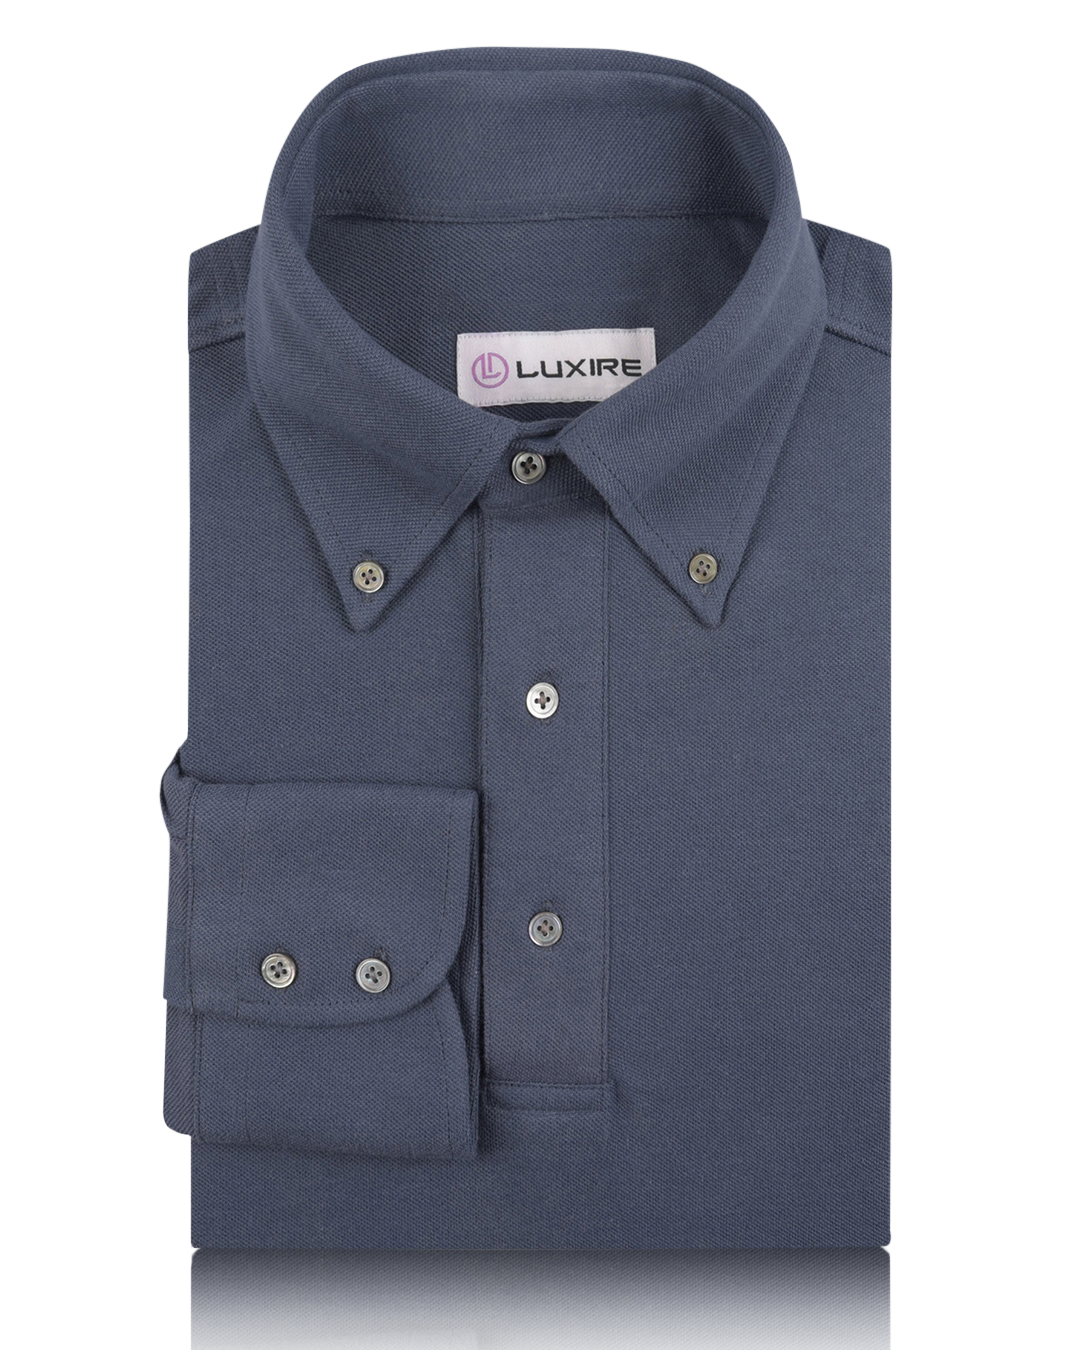 Front of the custom oxford polo shirt for men by Luxire in lead grey